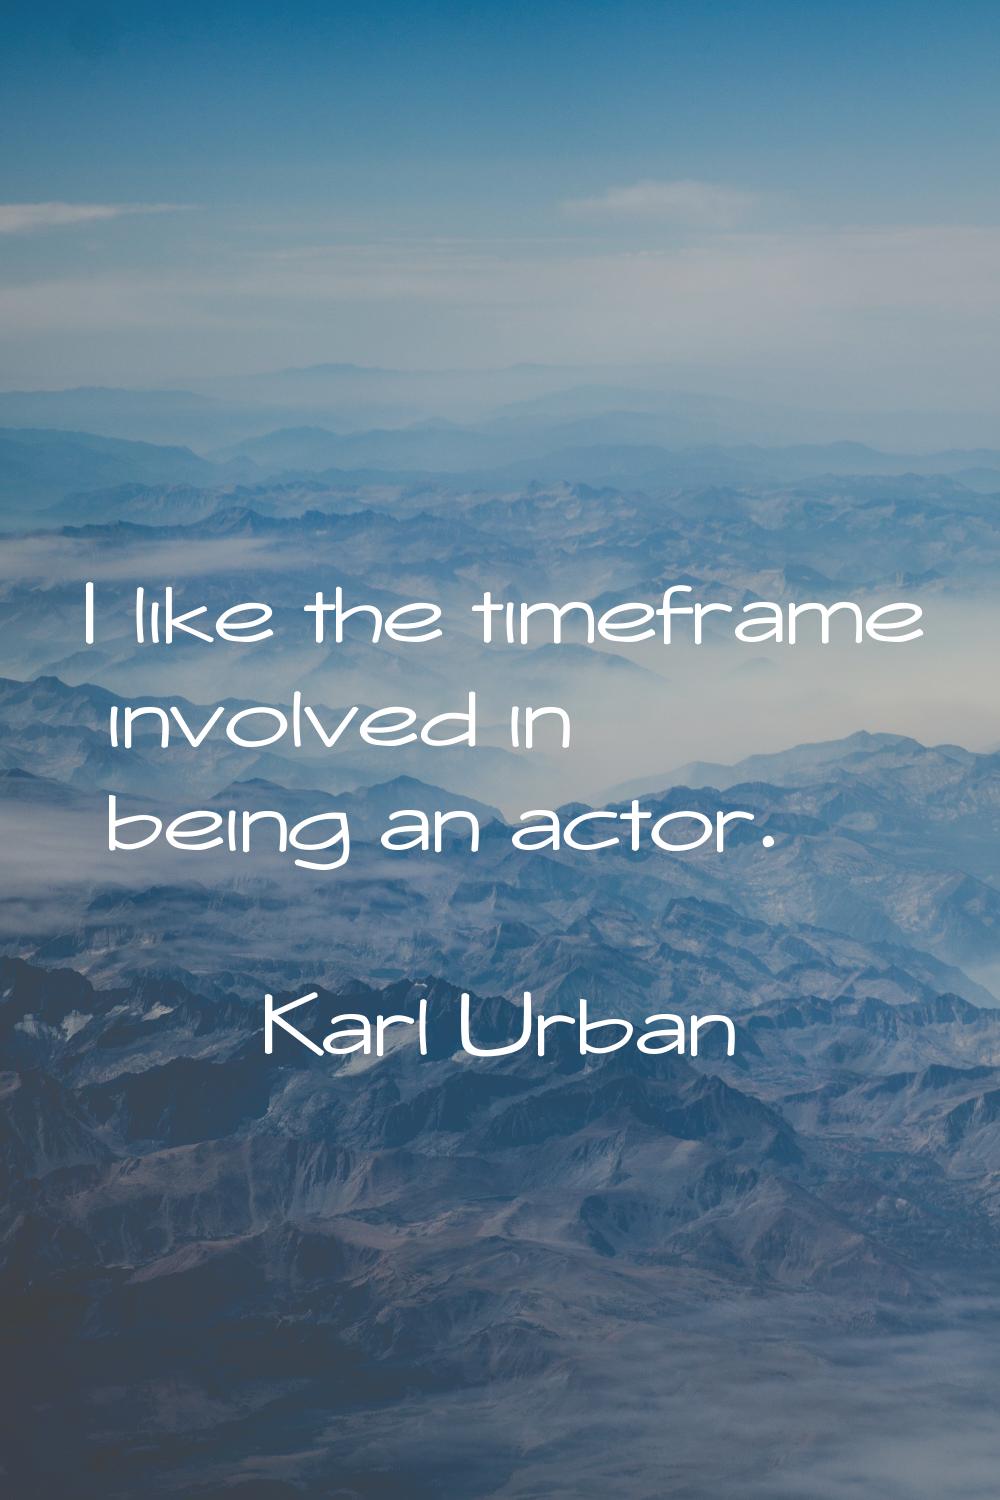 I like the timeframe involved in being an actor.